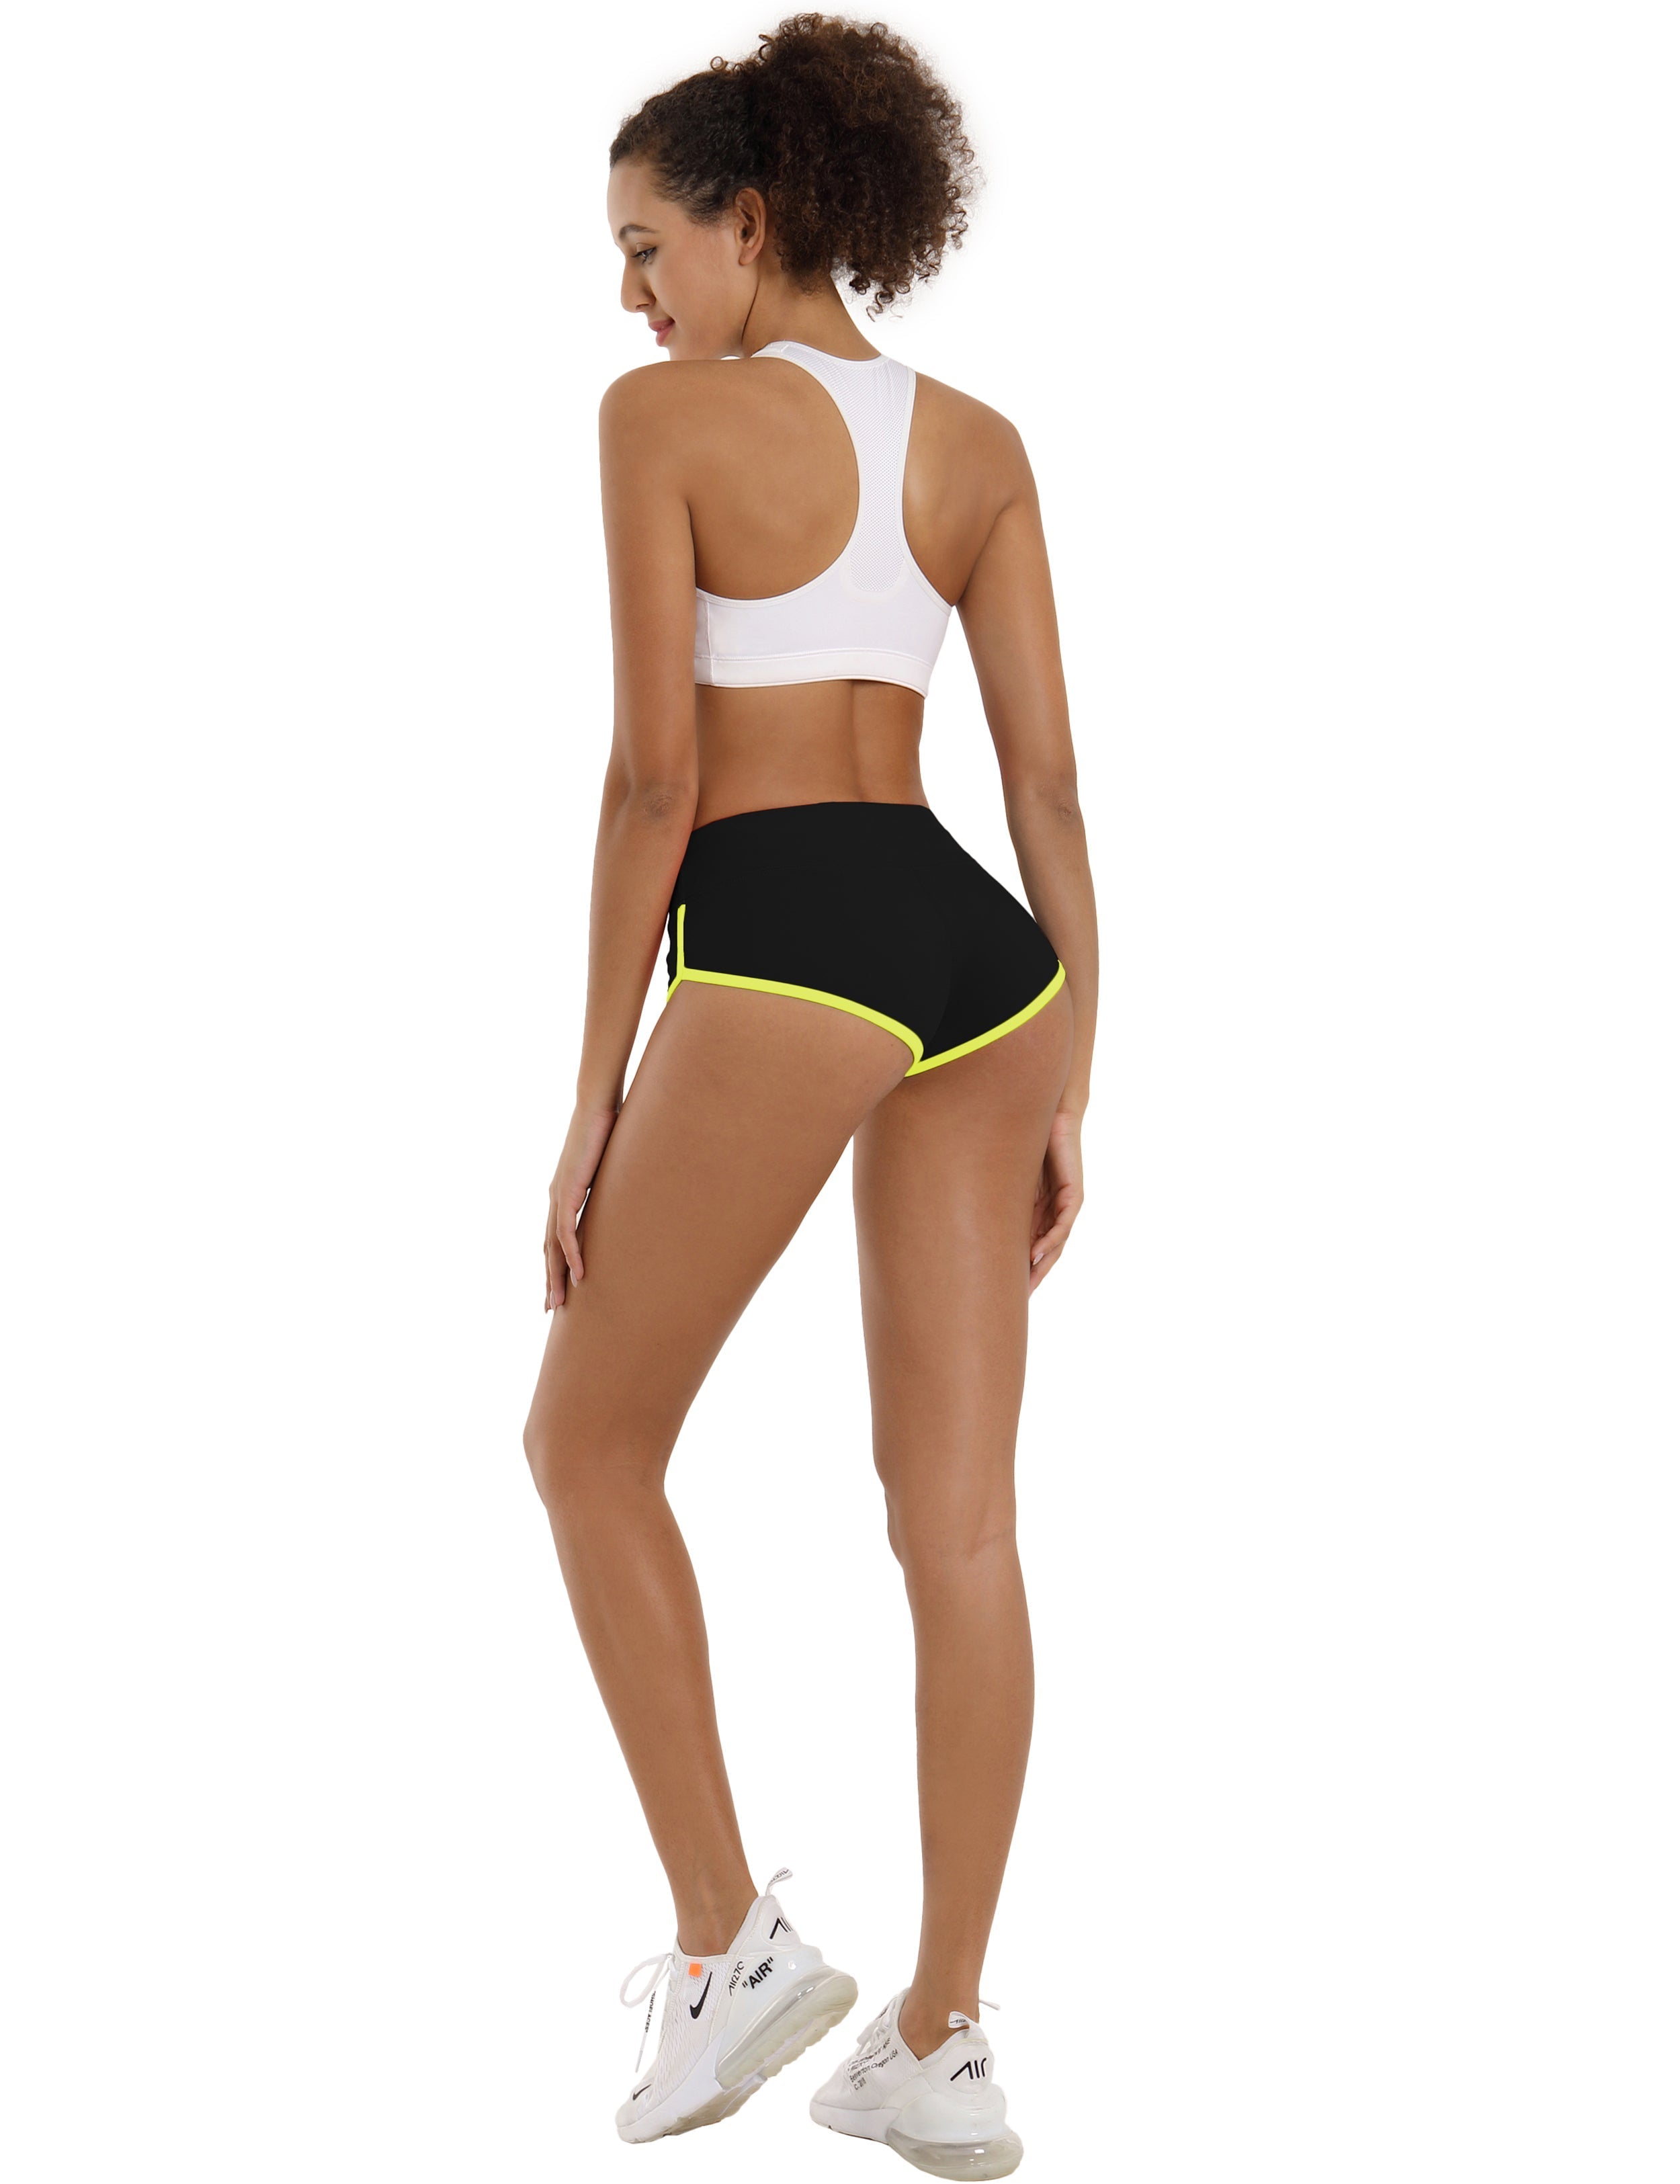 Sexy Booty Gym Shorts black_fluorescentyellow Sleek, soft, smooth and totally comfortable: our newest sexy style is here. Softest-ever fabric High elasticity High density 4-way stretch Fabric doesn't attract lint easily No see-through Moisture-wicking Machine wash 75%Nylon/25%Spandex